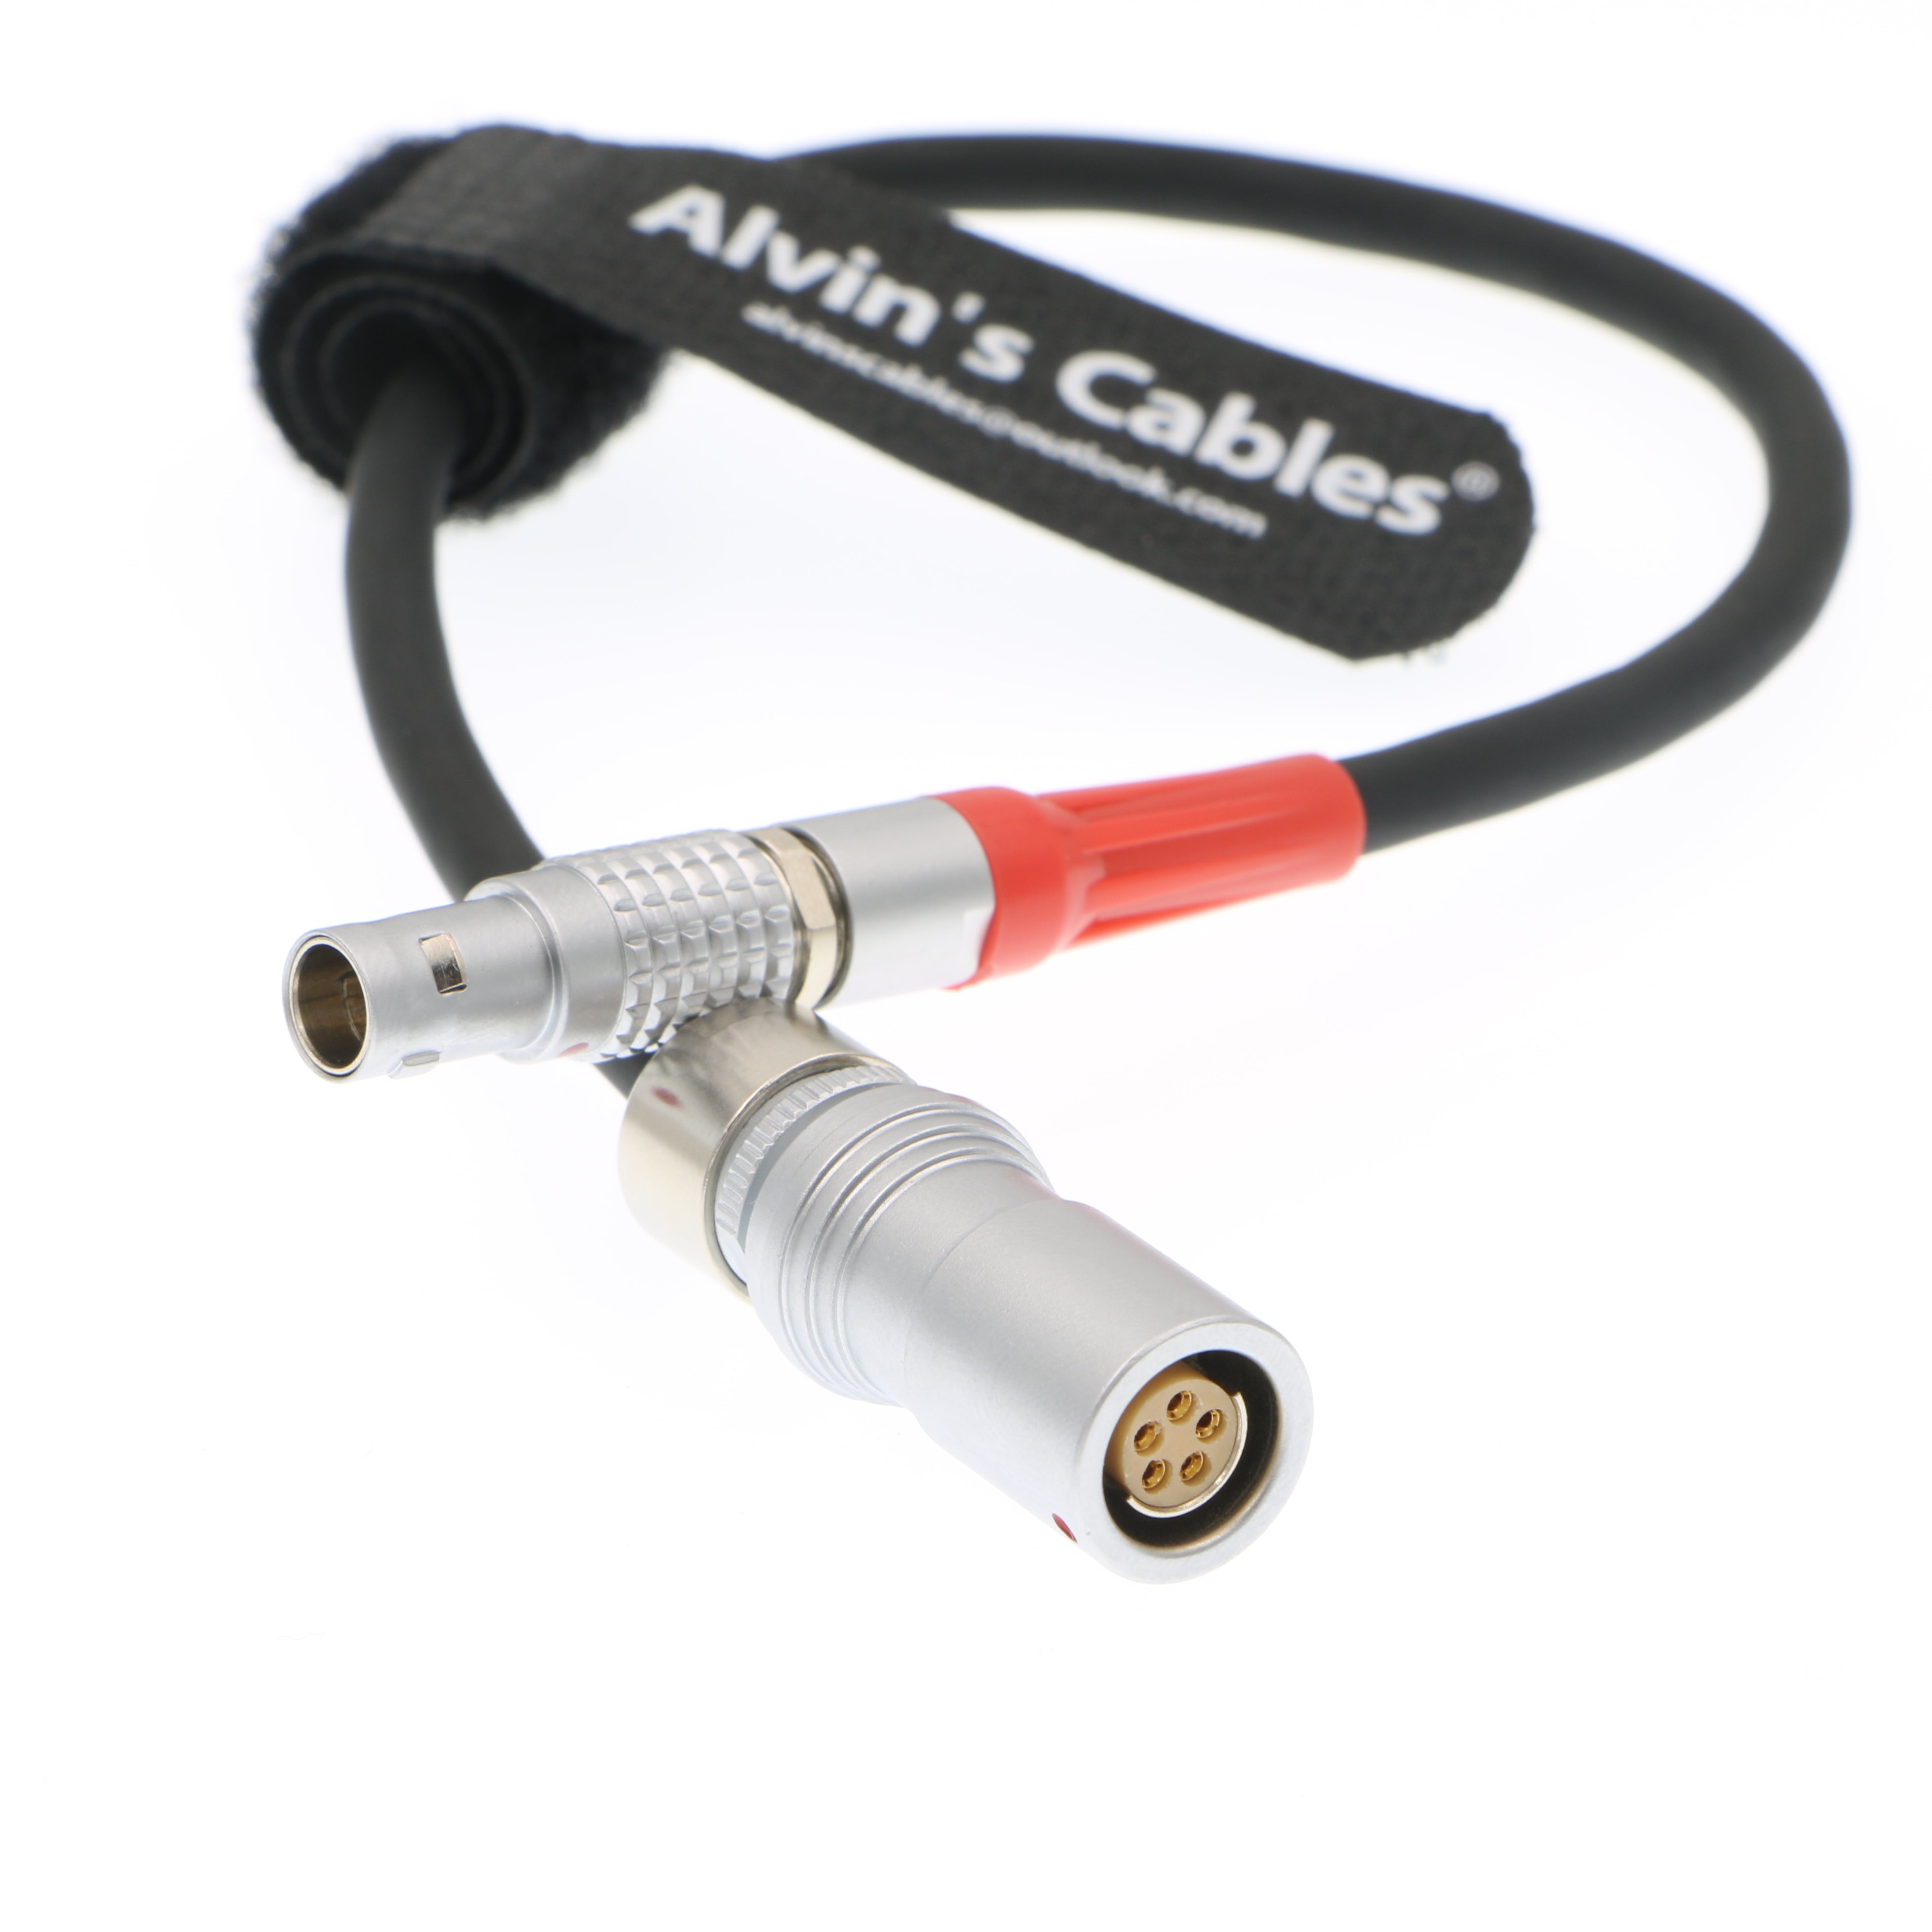 Alvin's Cables 4 Pin Male Cmotion LBUS to 5 Pin Female LCS Cable for Arri Lens Control System